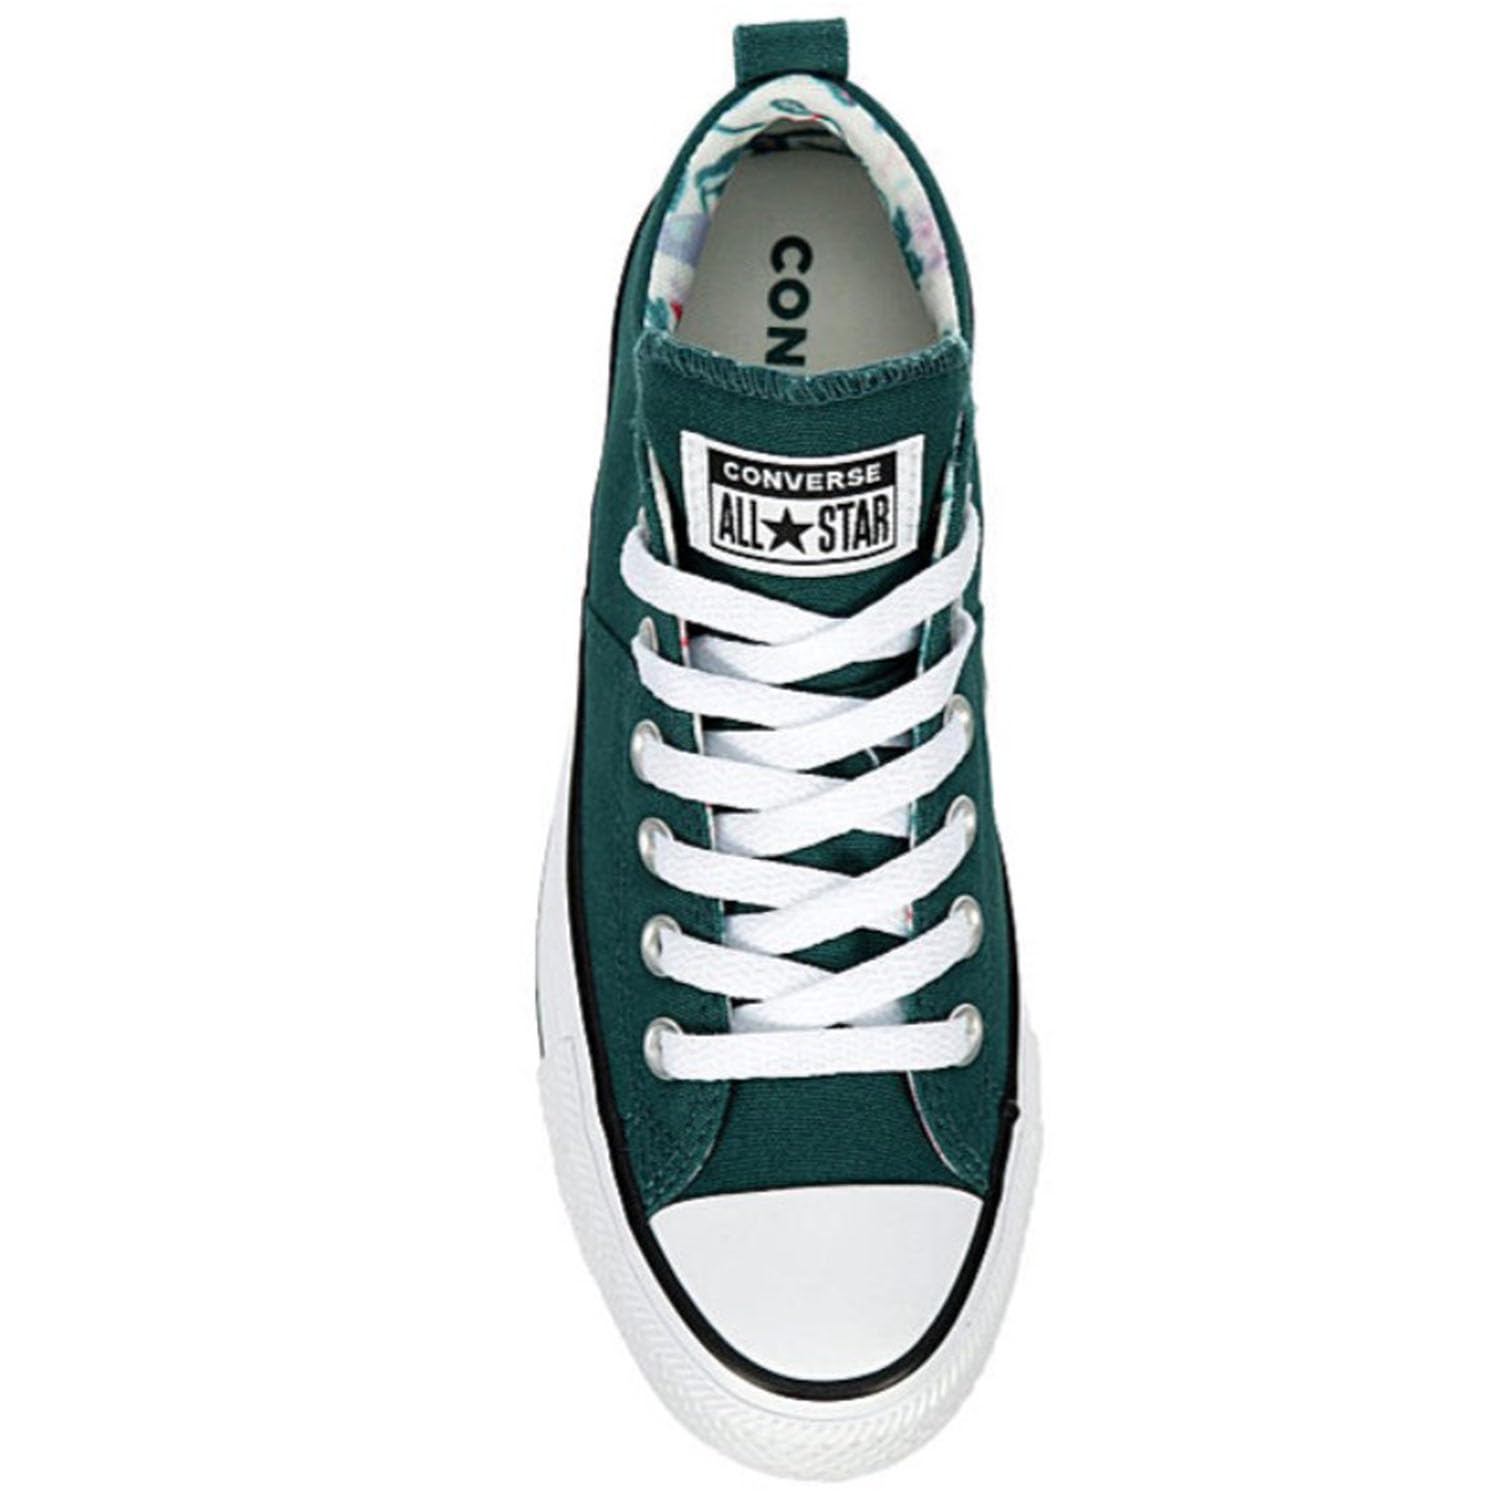 Converse Unisex Chuck Taylor All Star Madison Ox Canvas Sneaker - Lace up Closure Style - Dragon Scale/Dark Green